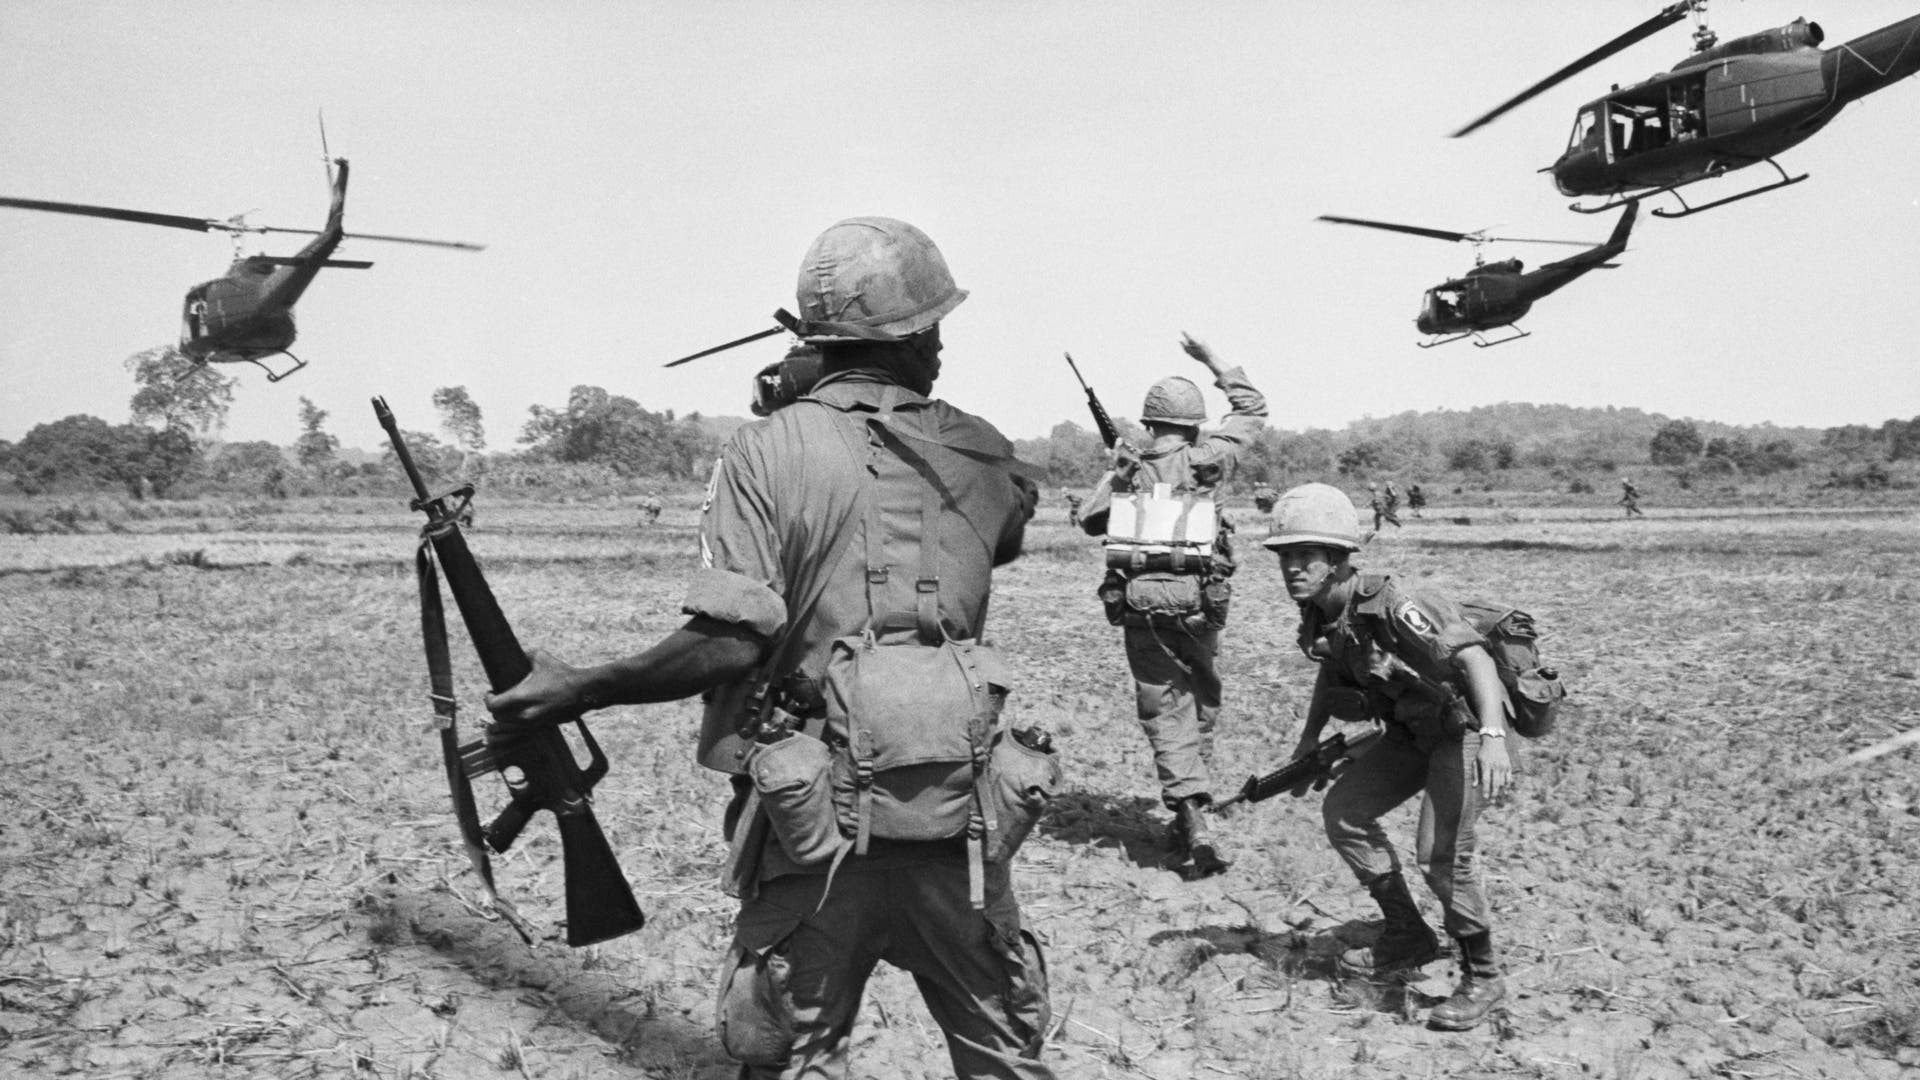 American Paratroopers in field Below Helicopters in South Vietnam(Original Caption) 5/31/1965-Bien Hoa, South Vietnam: United States paratroopers spread out after disembarking from helicopters during a co-ordinated exercise, the first in which all elements of the 173rd Airborne were used. Communist forces are reported to be making heavy attacks against units of the South Vietnamese army and have caused heavy casualties.